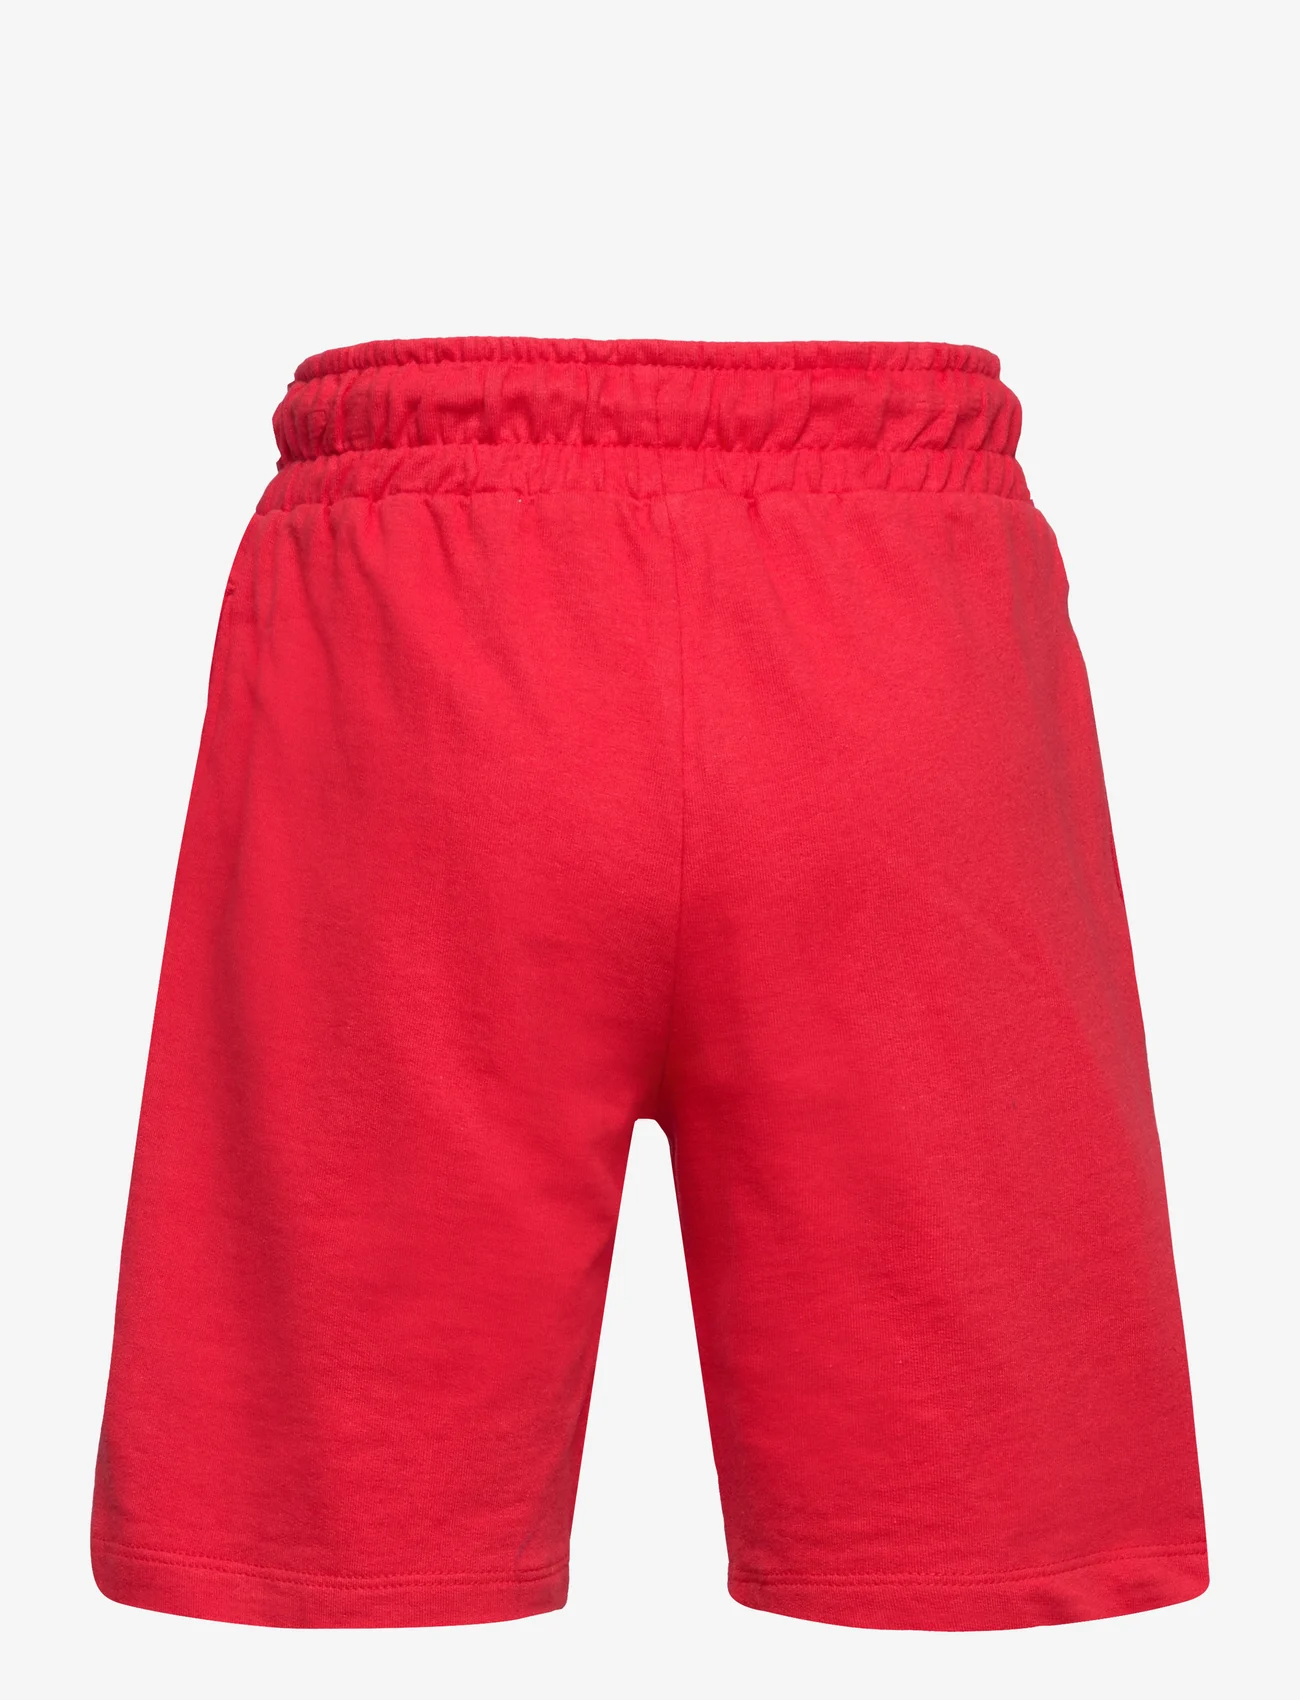 Marvel - SHORT FRENCH TERRY - sweatshorts - red - 1